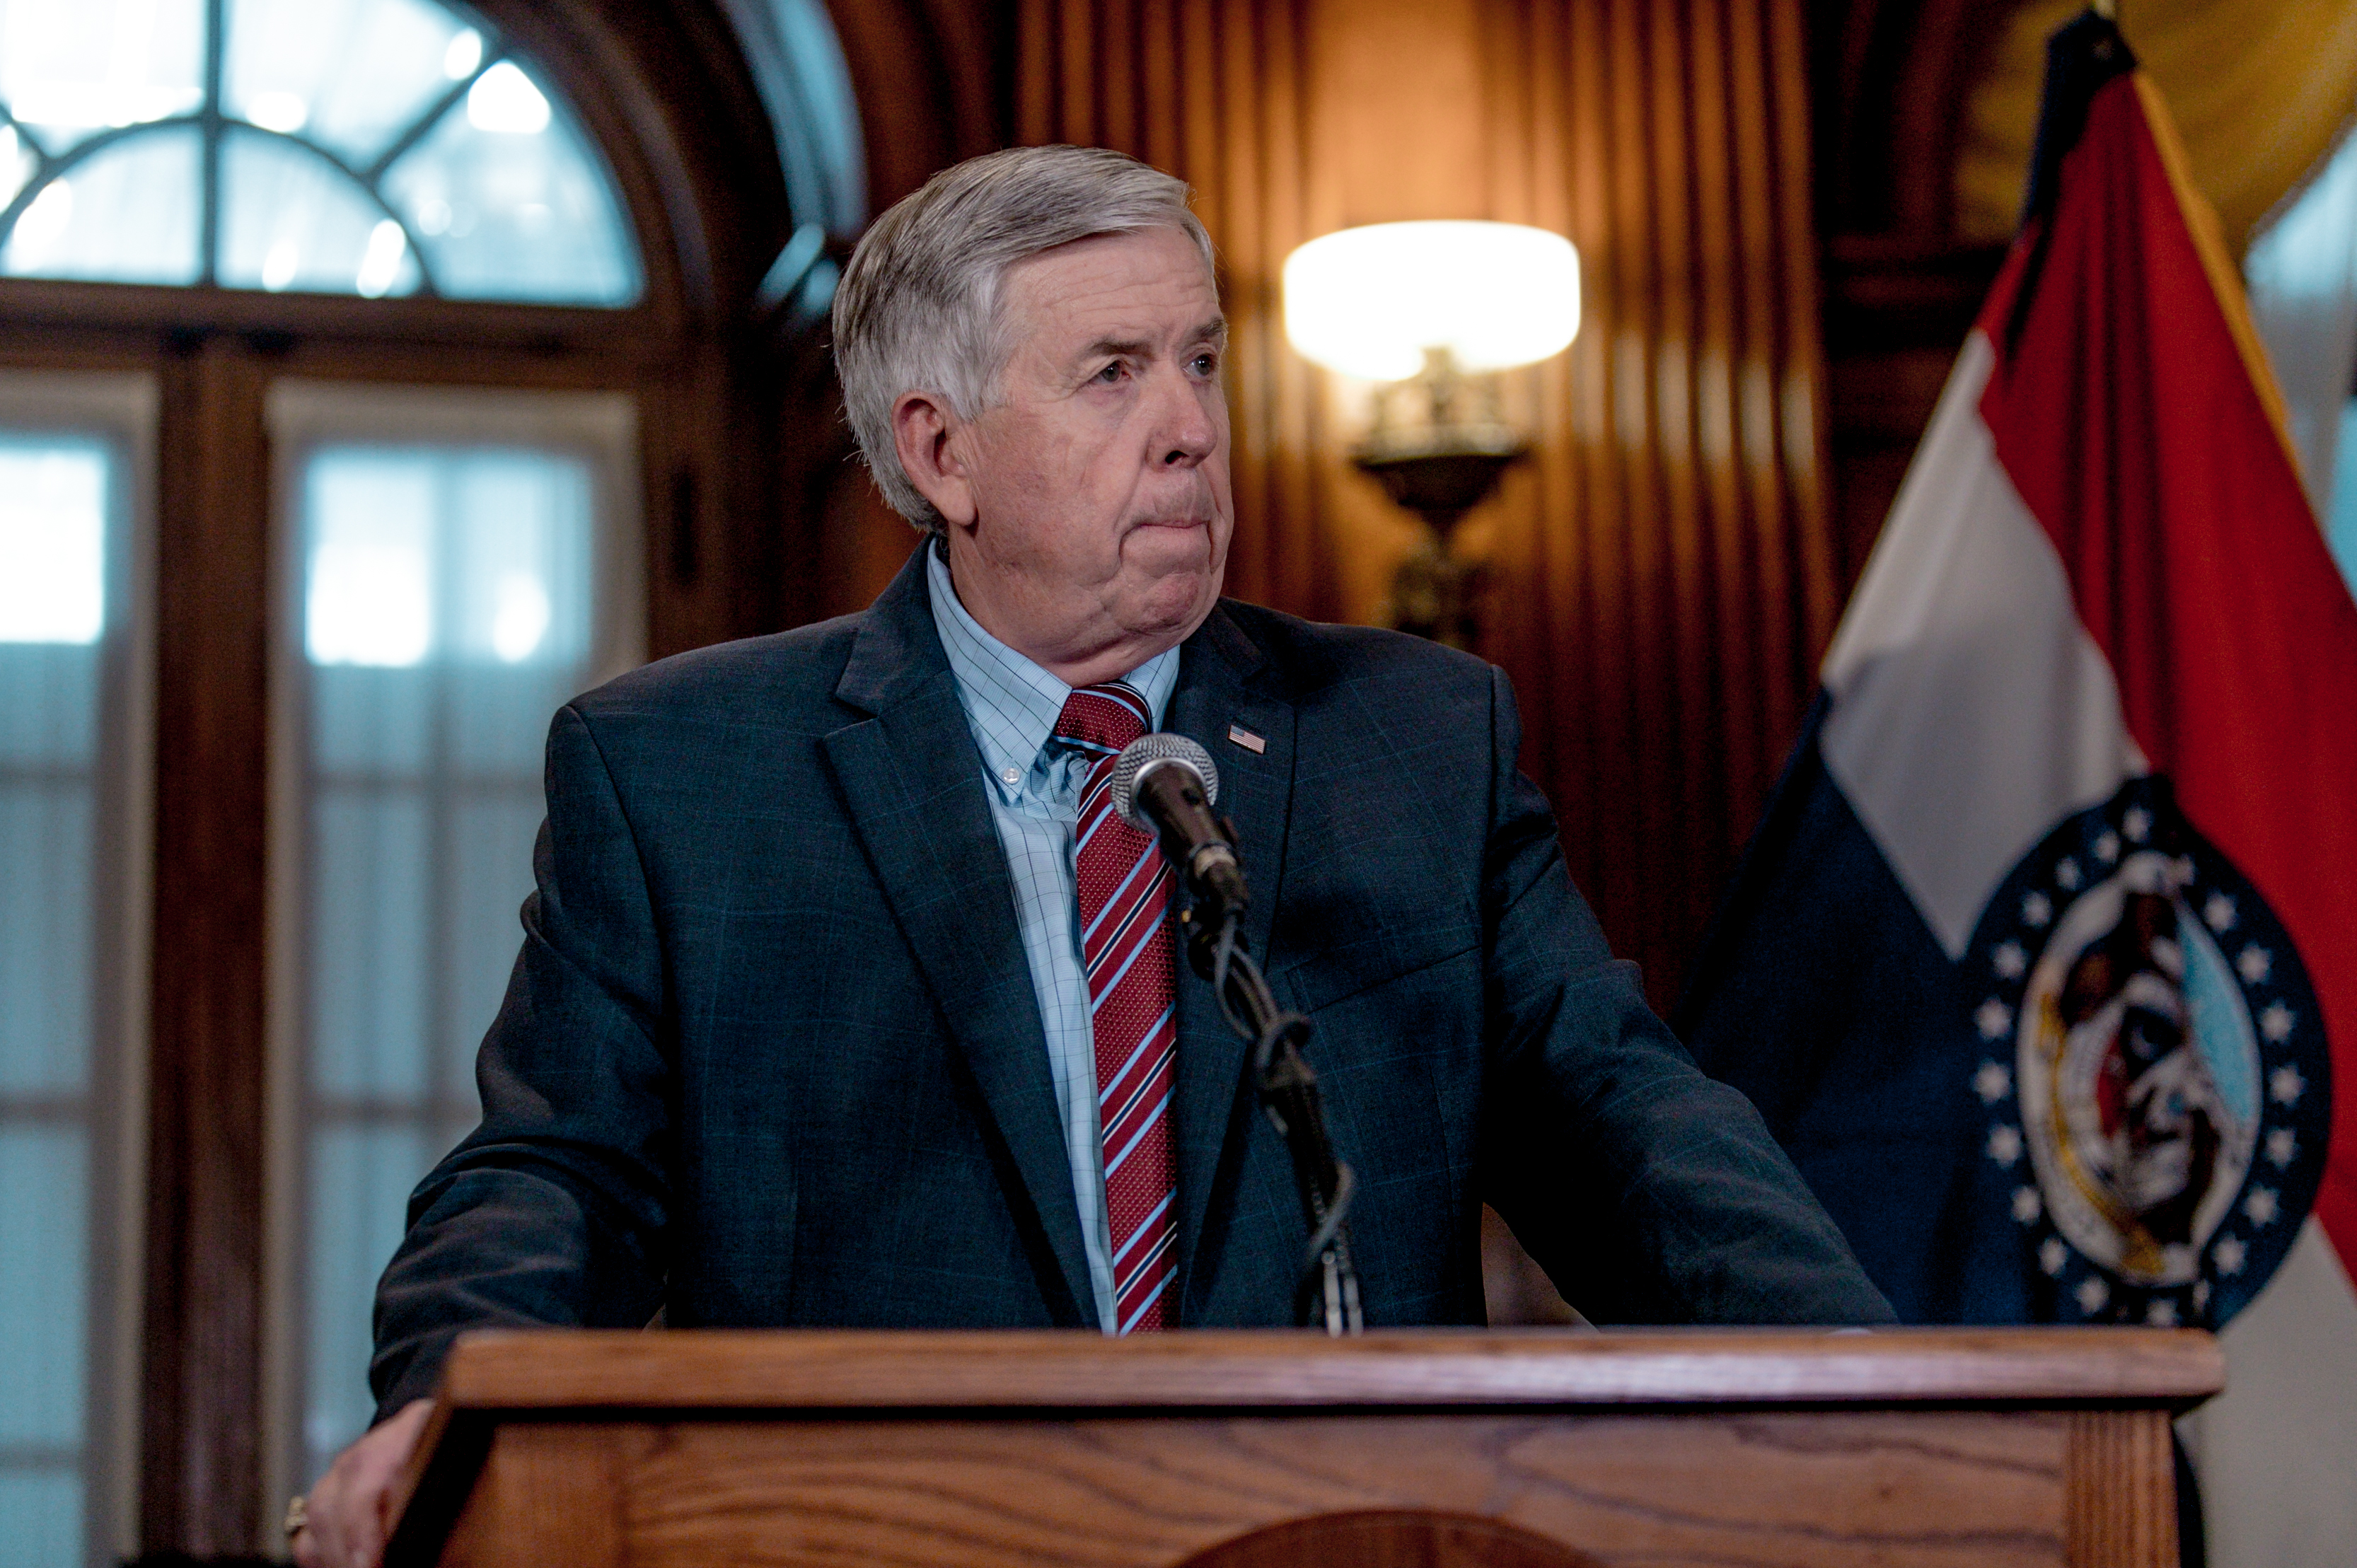 Gov. Mike Parson listens to a media question during a press conference in Jefferson City, Missouri on May 29, 2019.